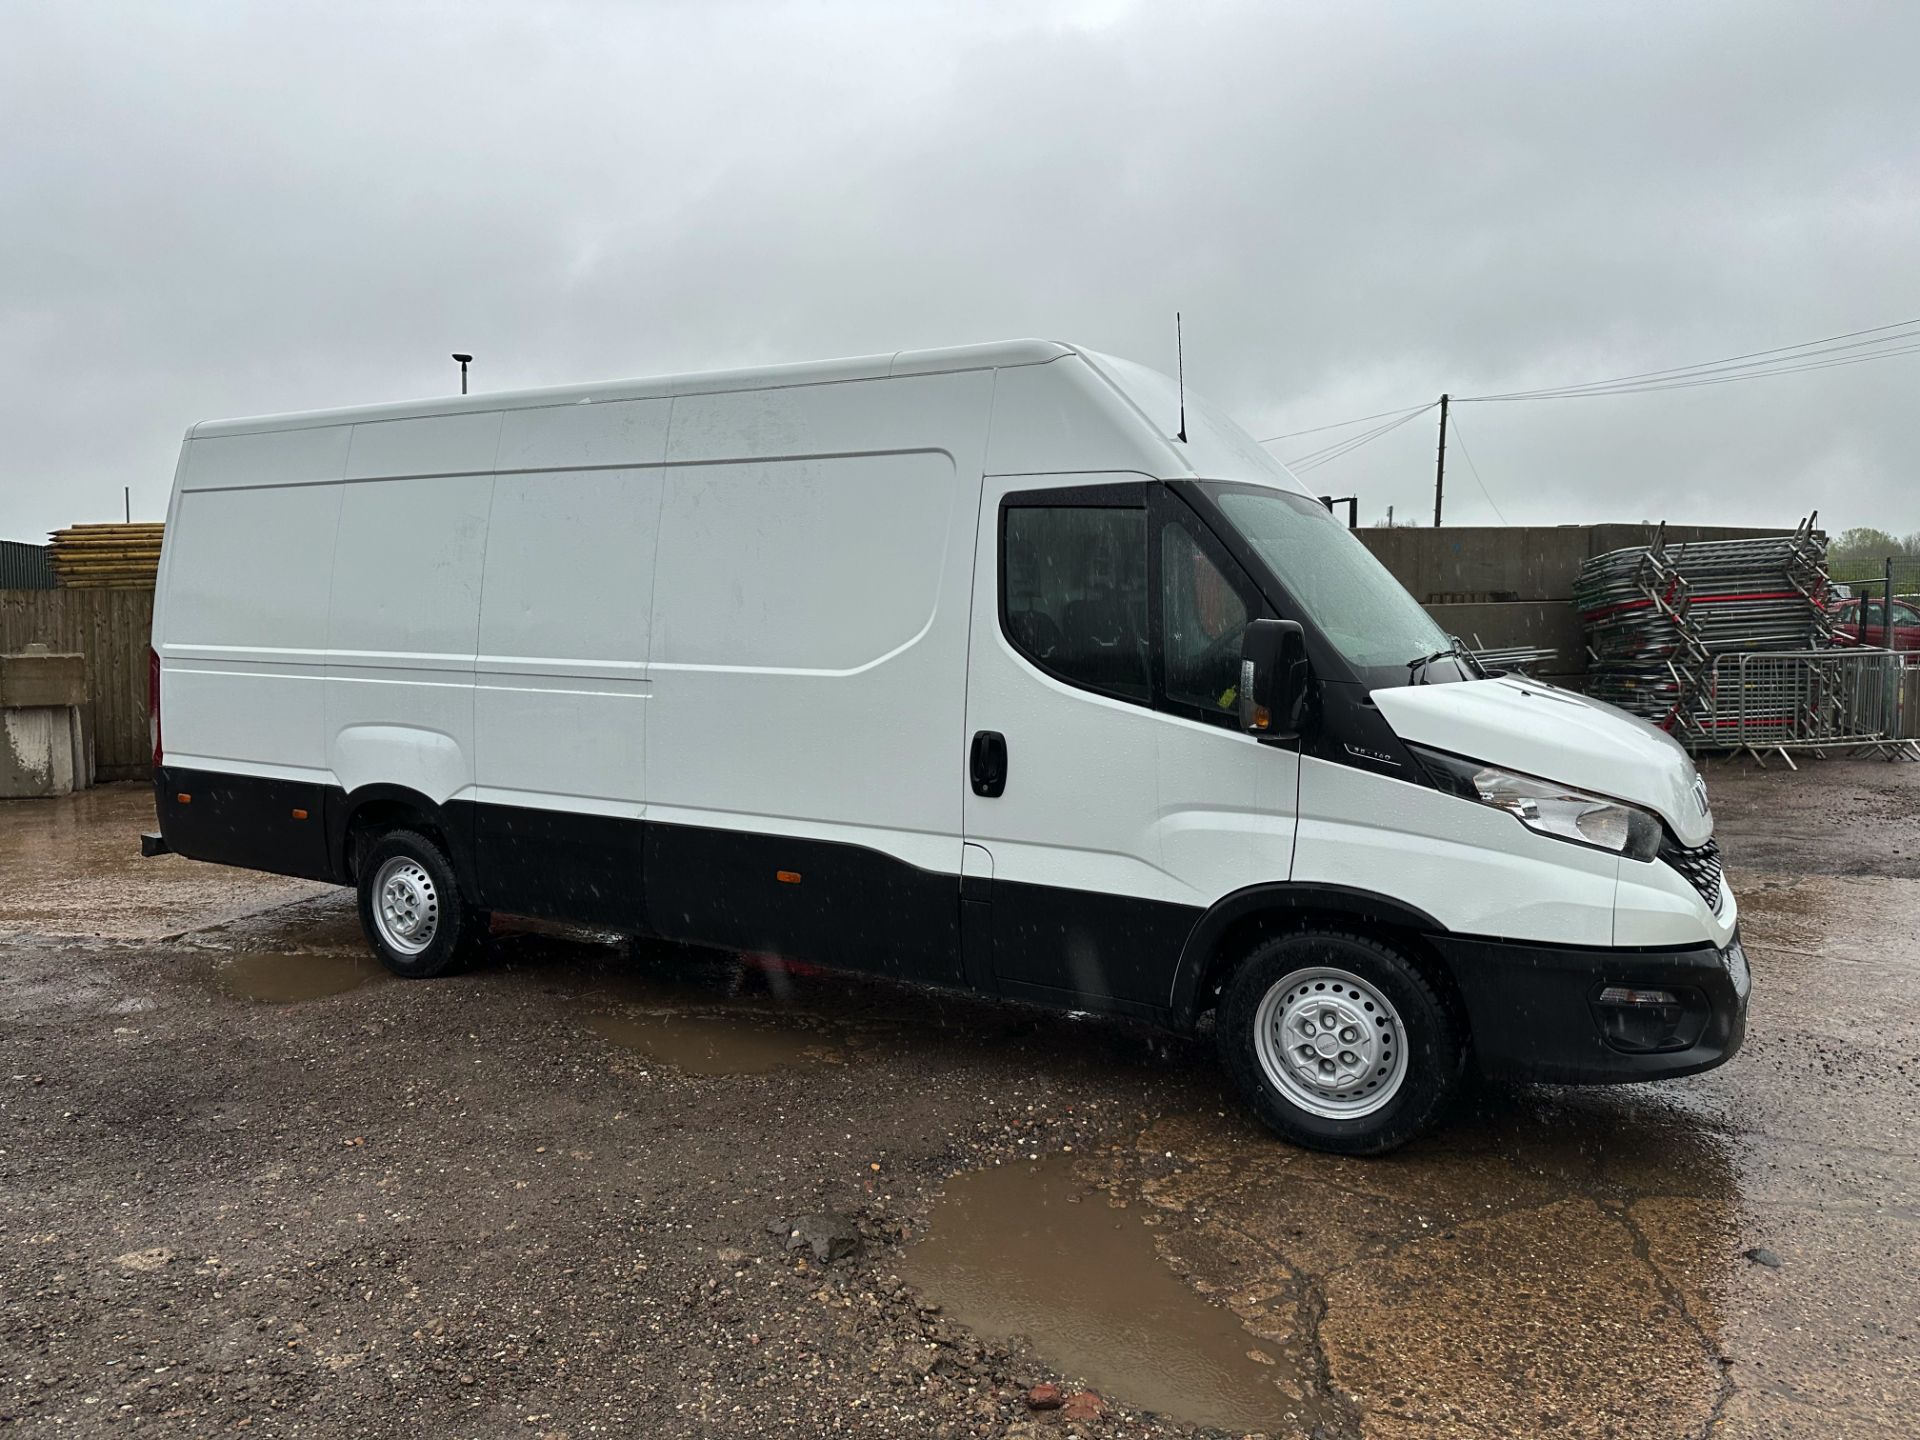 Iveco Daily 35-140 Long Wheel Base High Roof - 2021 Reg (New Shape) Only 85K Miles - Air Con - Look!